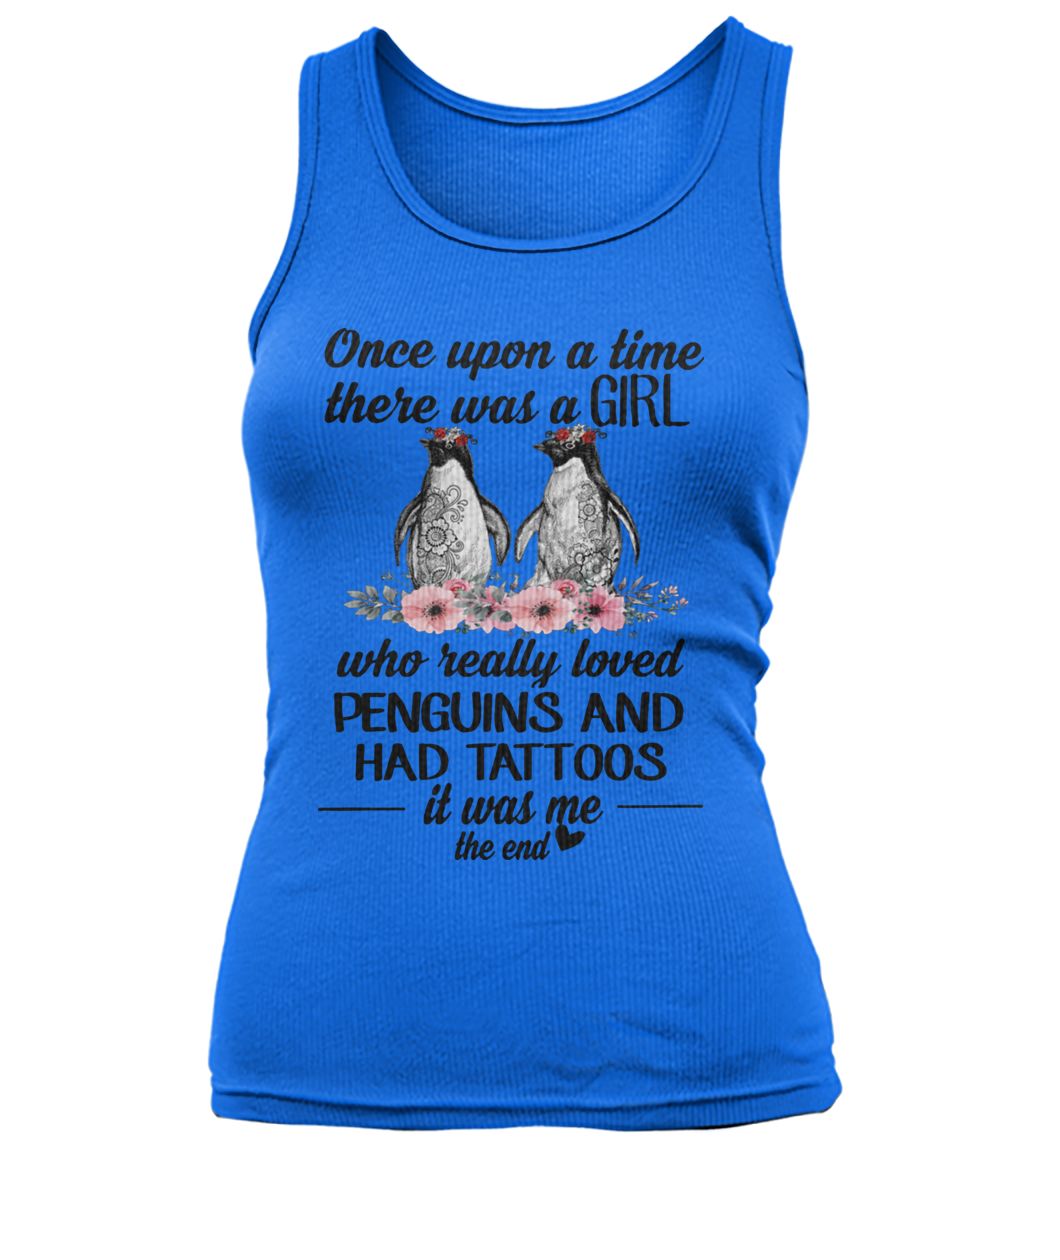 Once upon a time there was a girl who really loved penguins and had tattoos it was me the end women's tank top